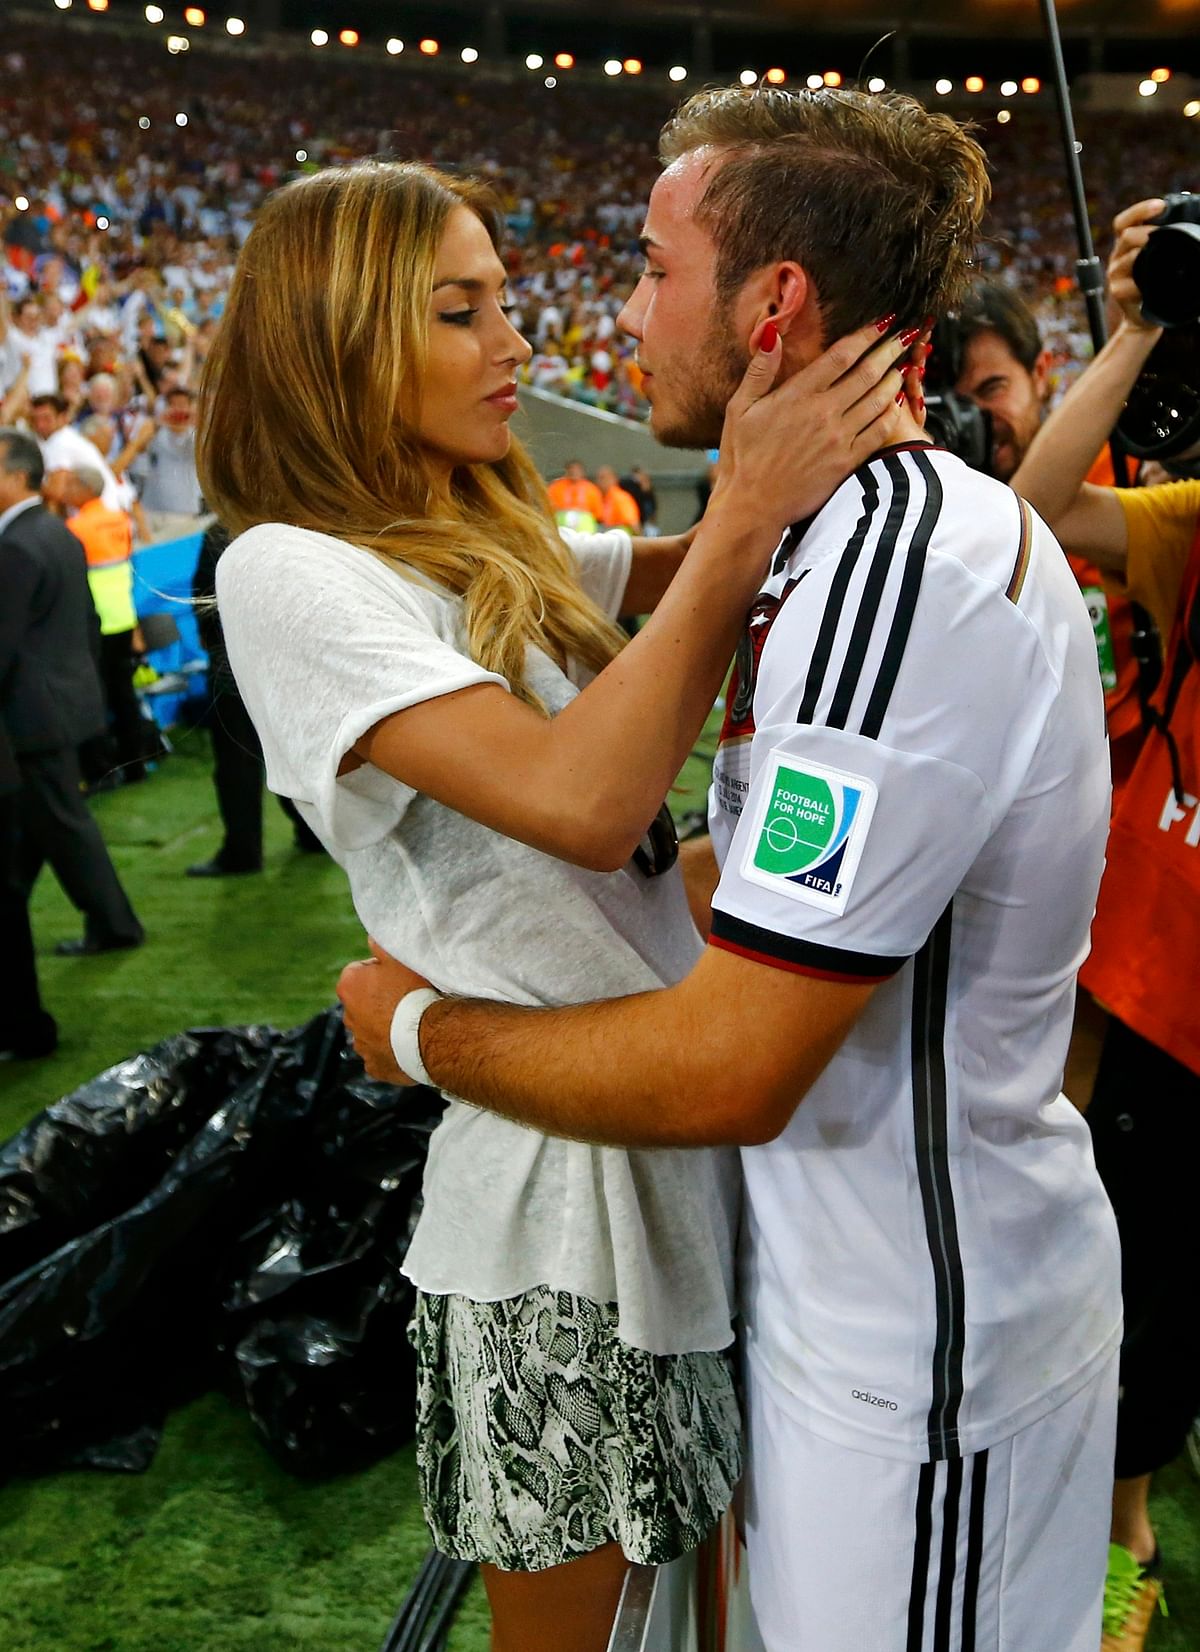 Germany's Mario Goetze hugs his girlfriend Ann-Kathrin Brommel after extra time in the 2014 World Cup final between Germany and Argentina at the Maracana stadium in Rio de Janeiro on July 13, 2014. Reuters